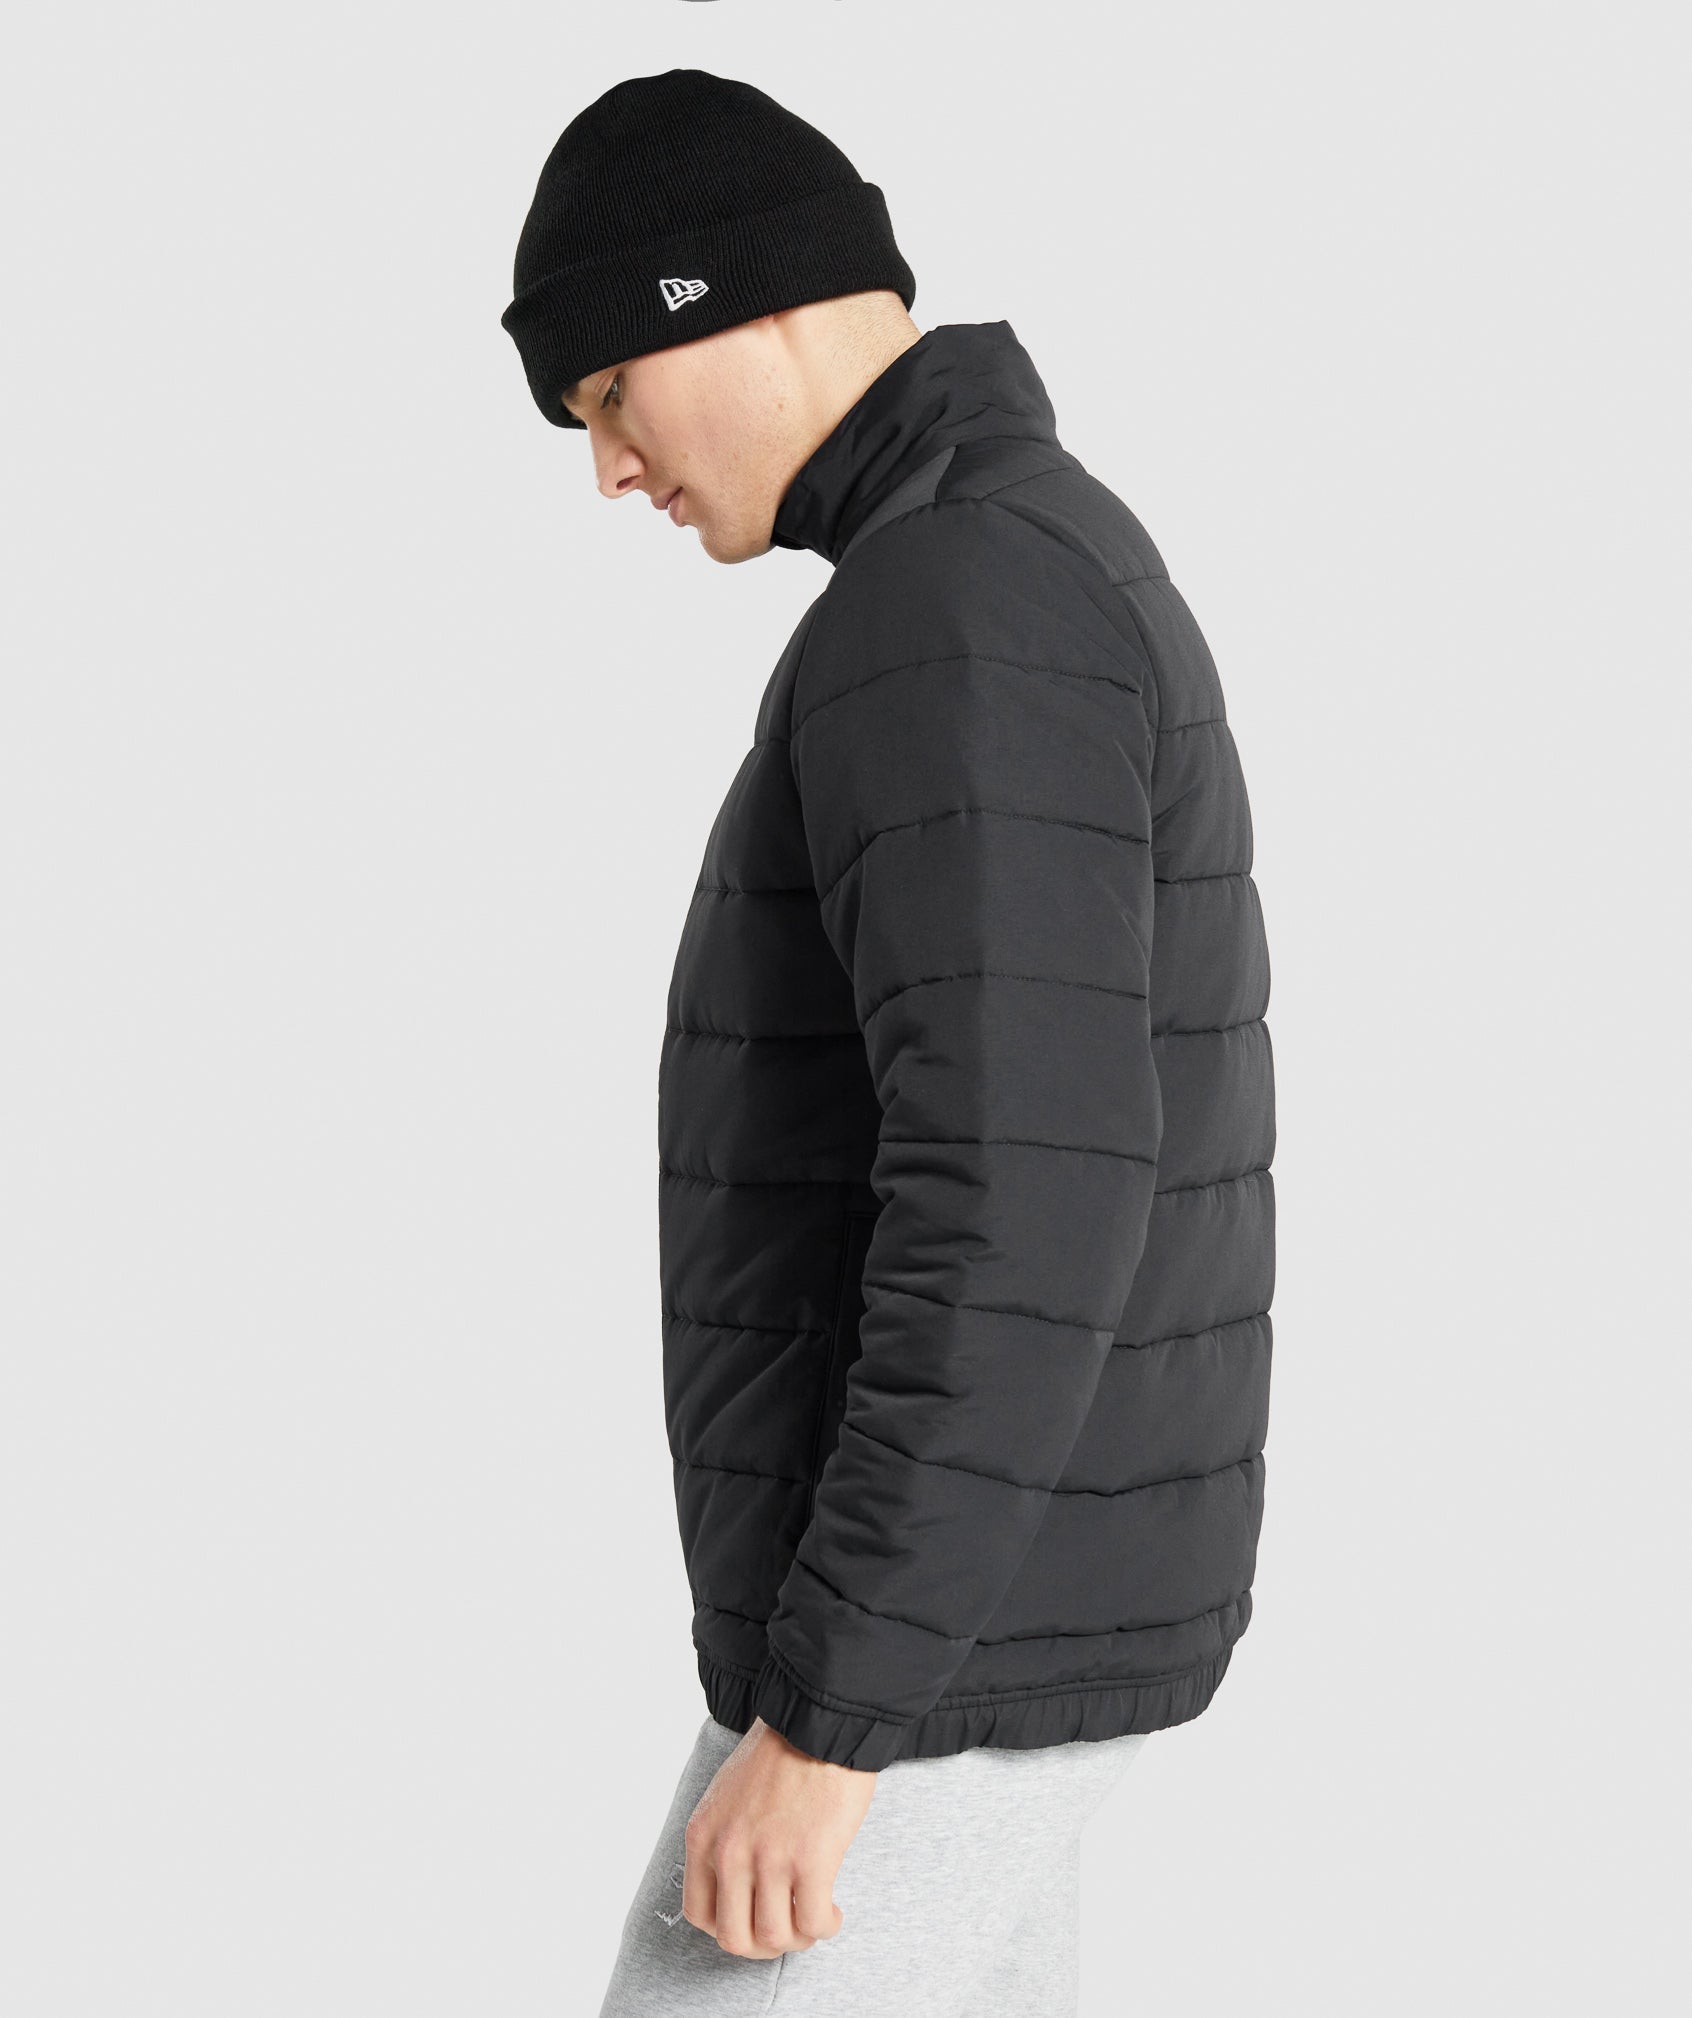 Crest Padded Jacket in Black - view 4